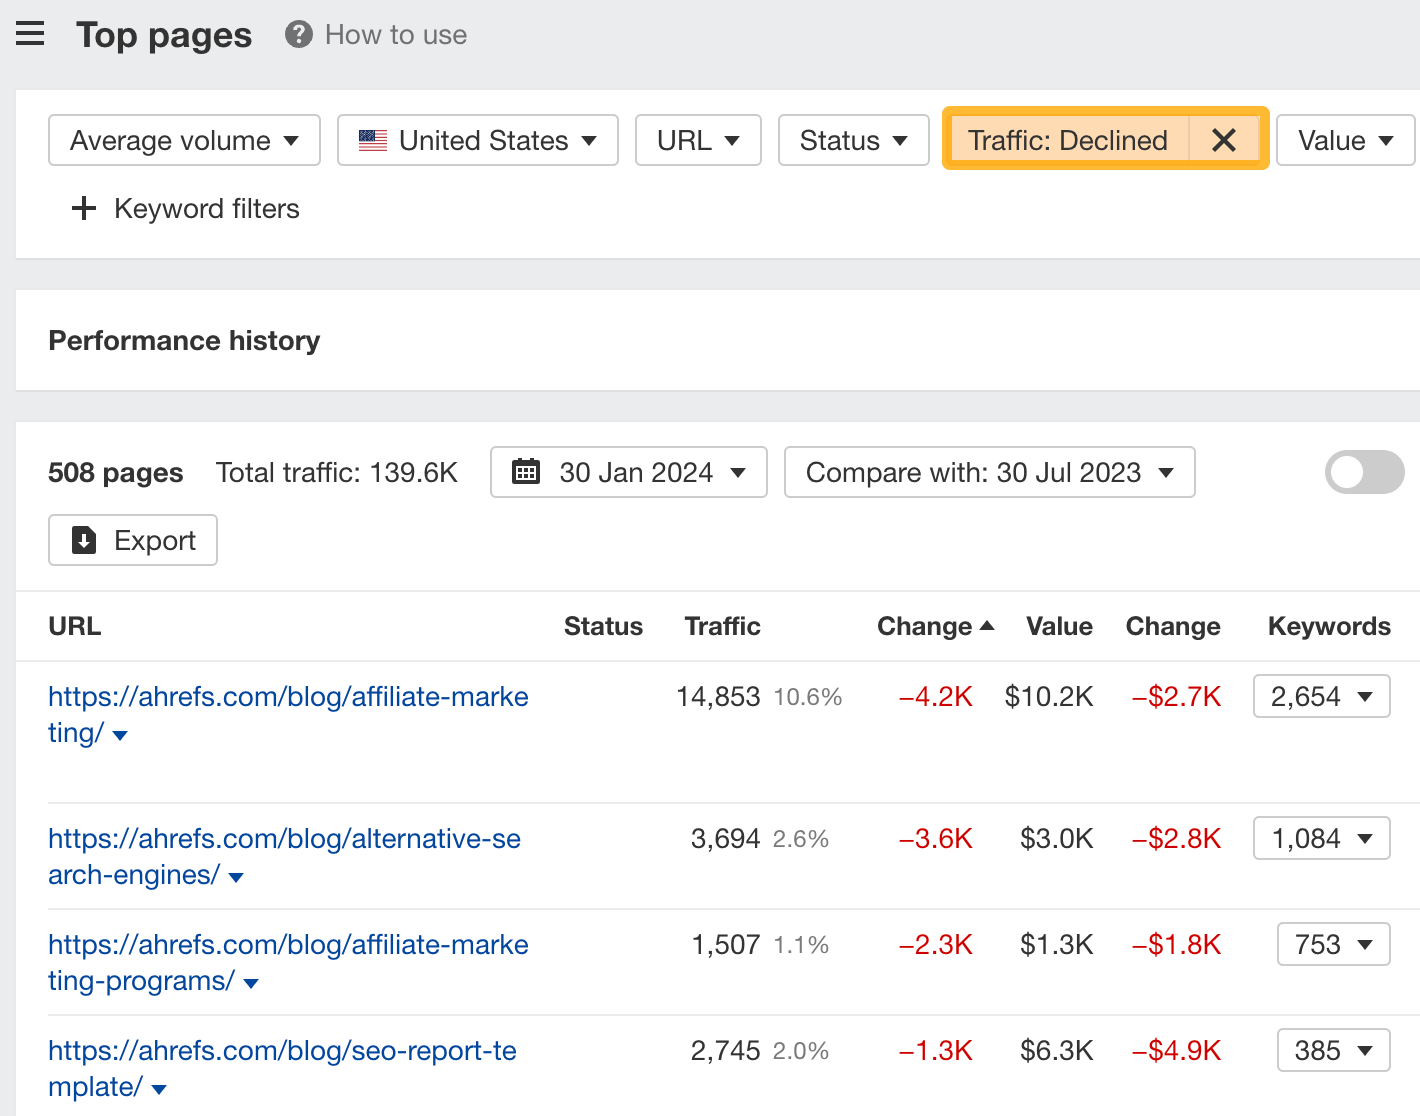 Pages with declining traffic in Top pages